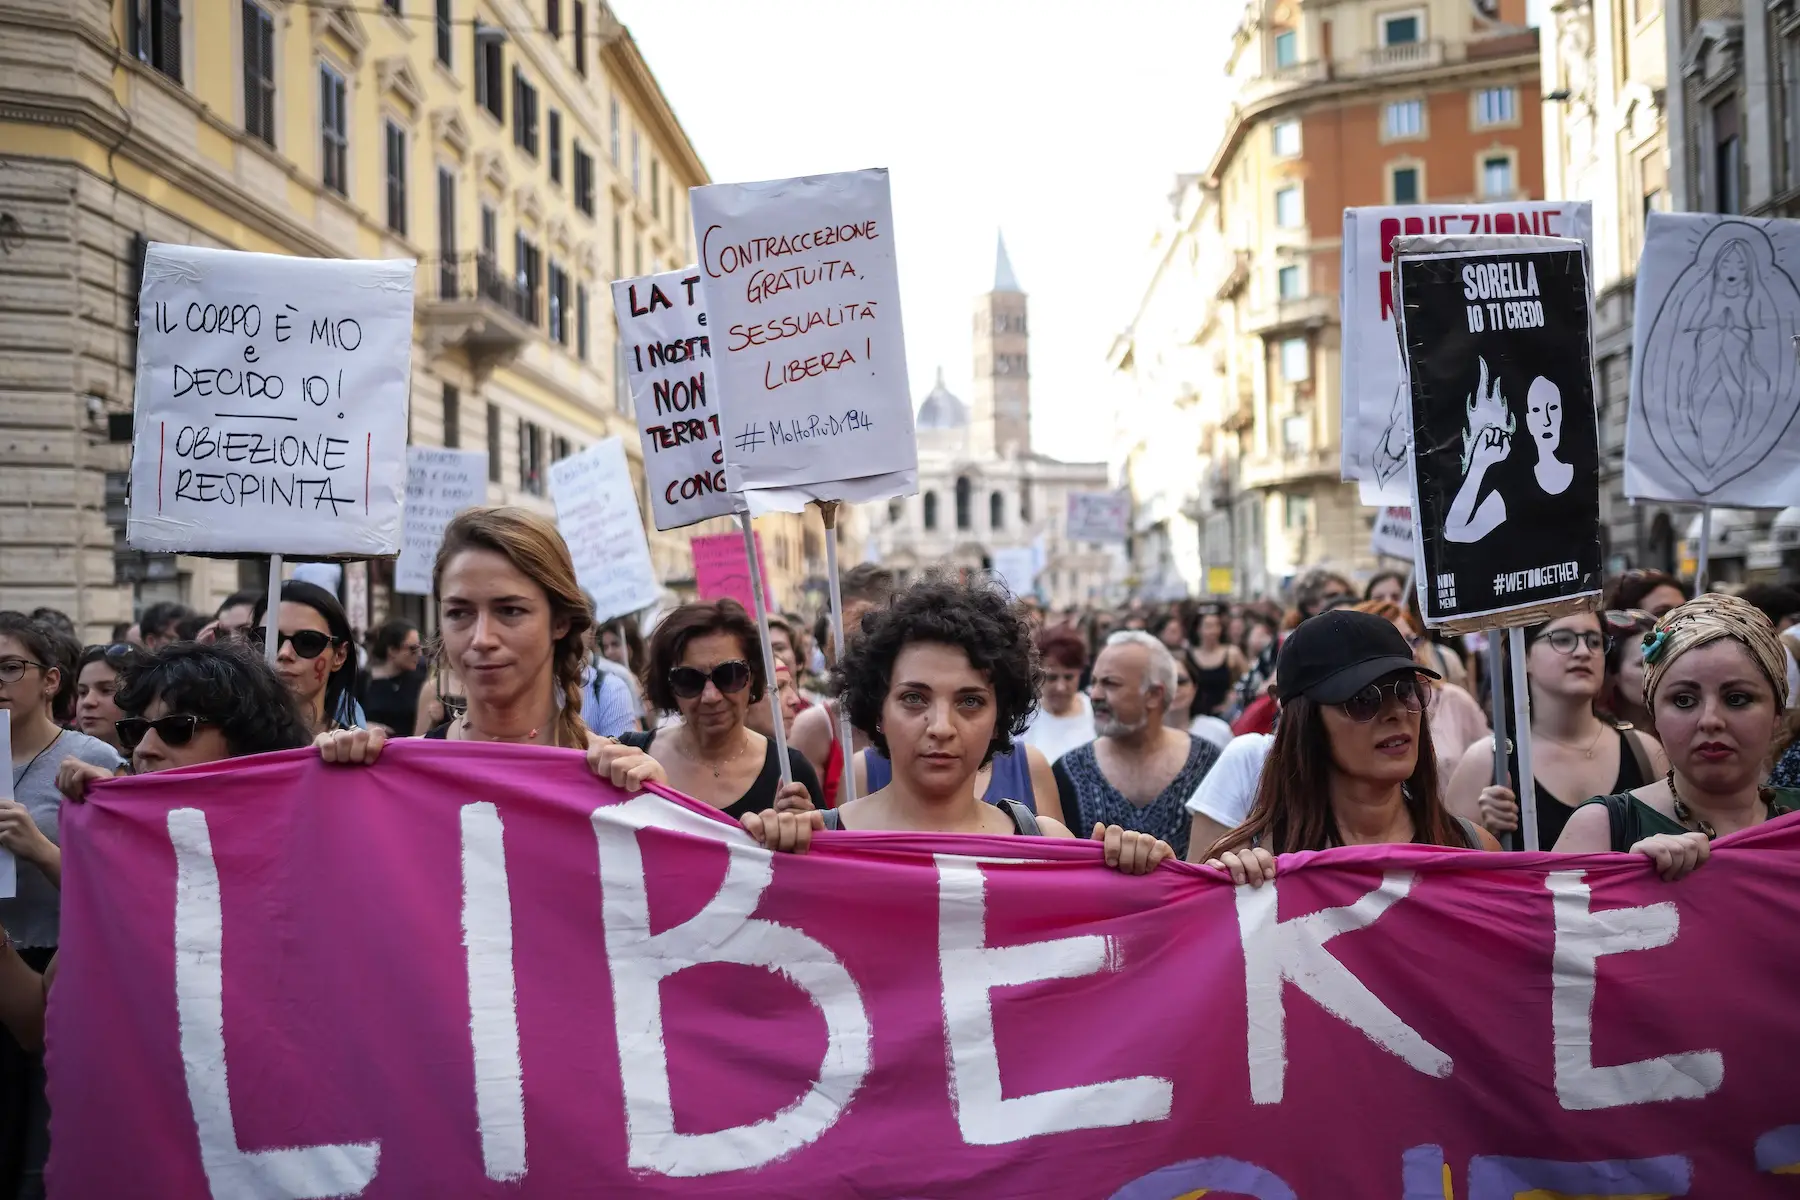 A large crowd of mostly women carries a pink banner and picket signs down the streets of Rome in support of abortion rights